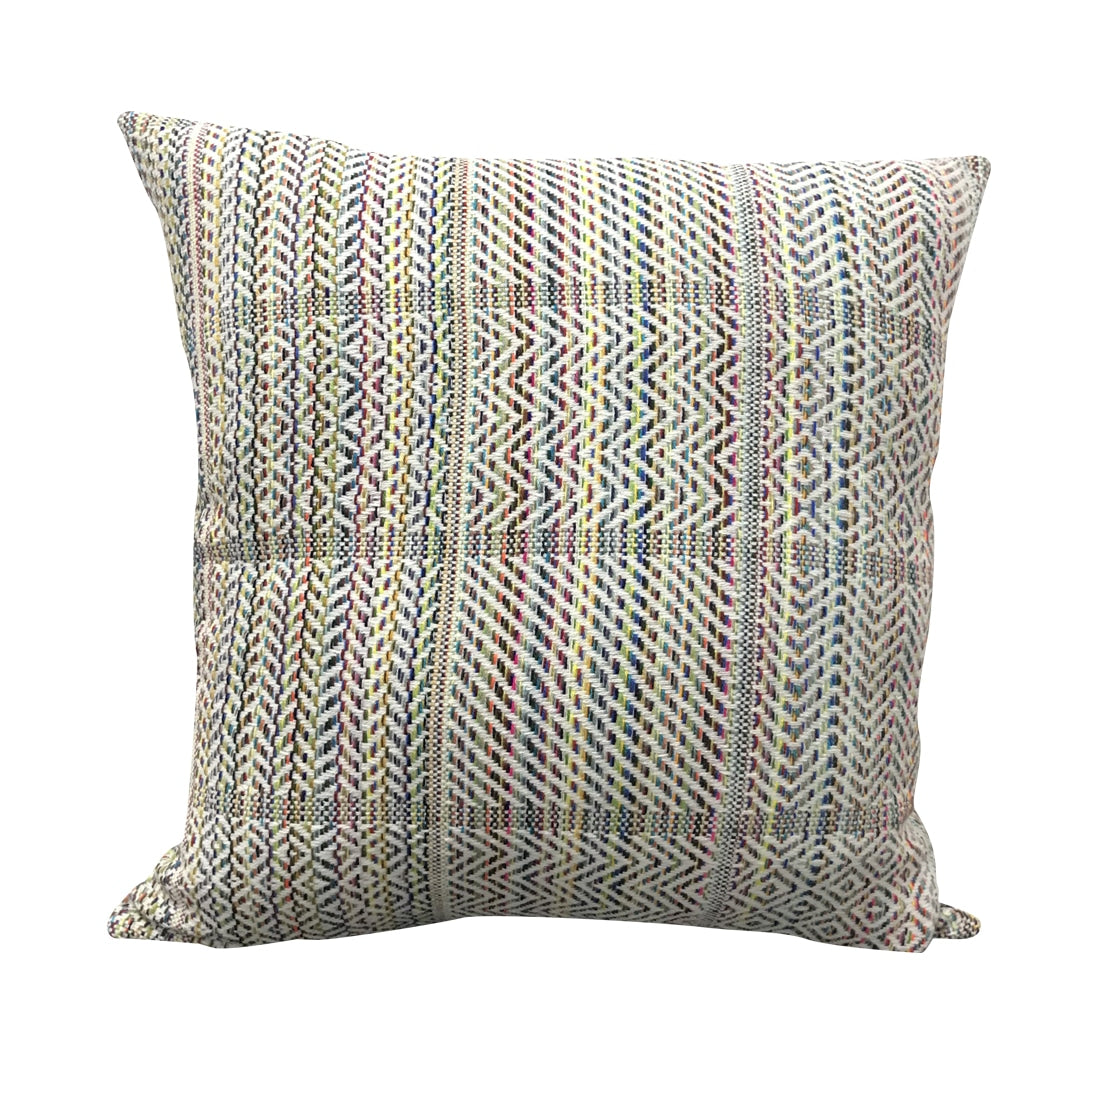 Multi Color Cushion Cover Hand Woven Bedroom Sofa Pillow Case 16x16